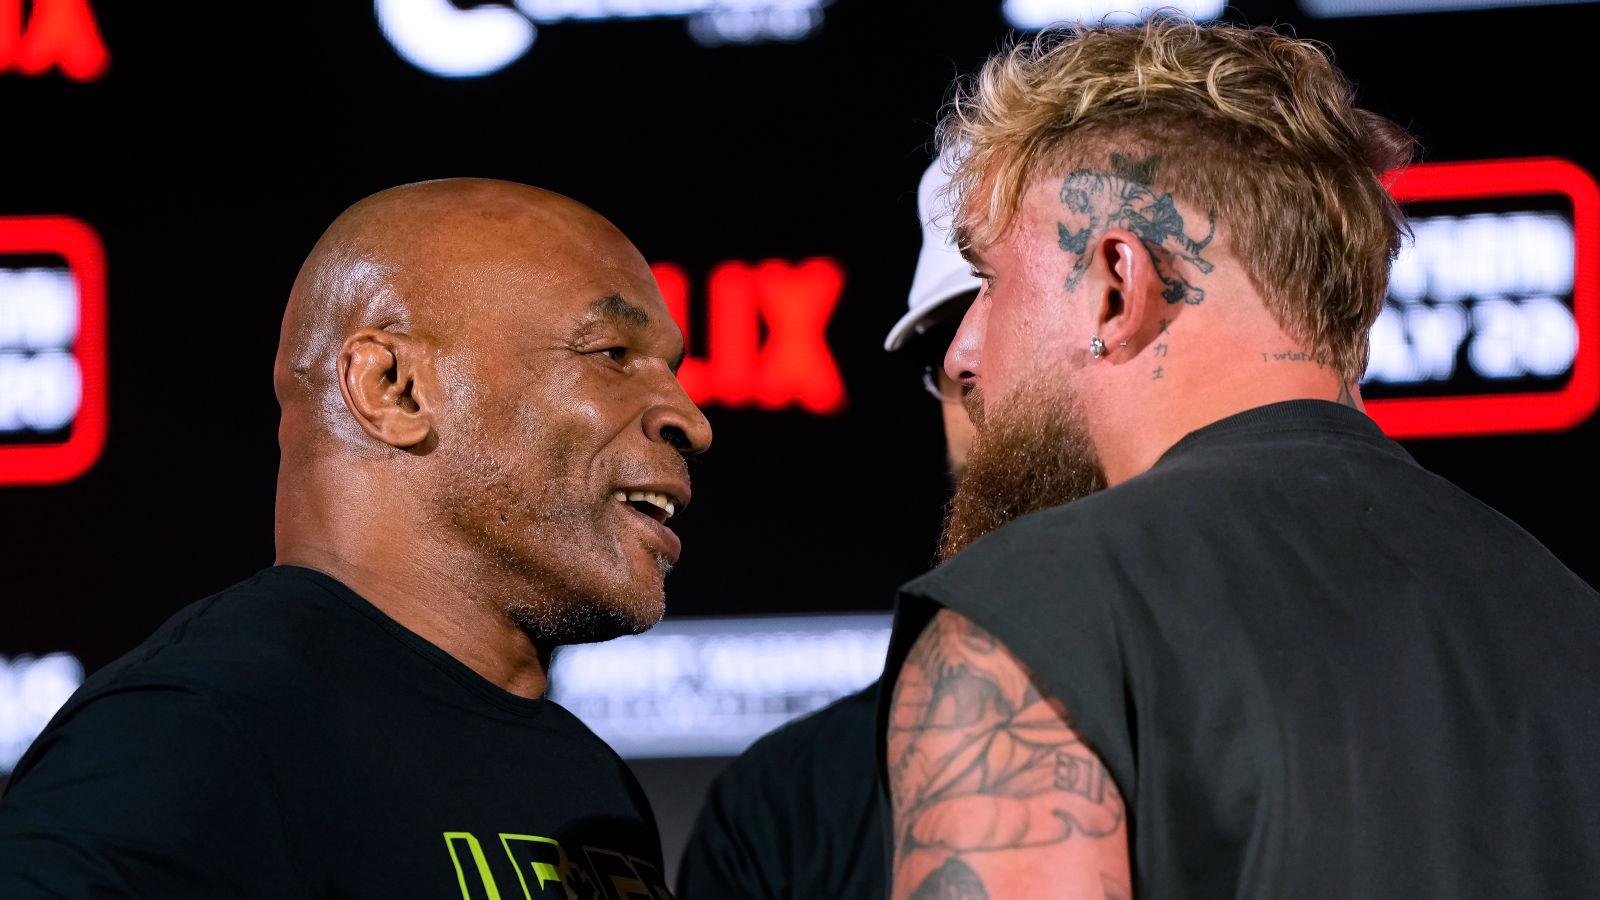 Mike Tyson and Jake Paul come face to face during their press conference in Dallas